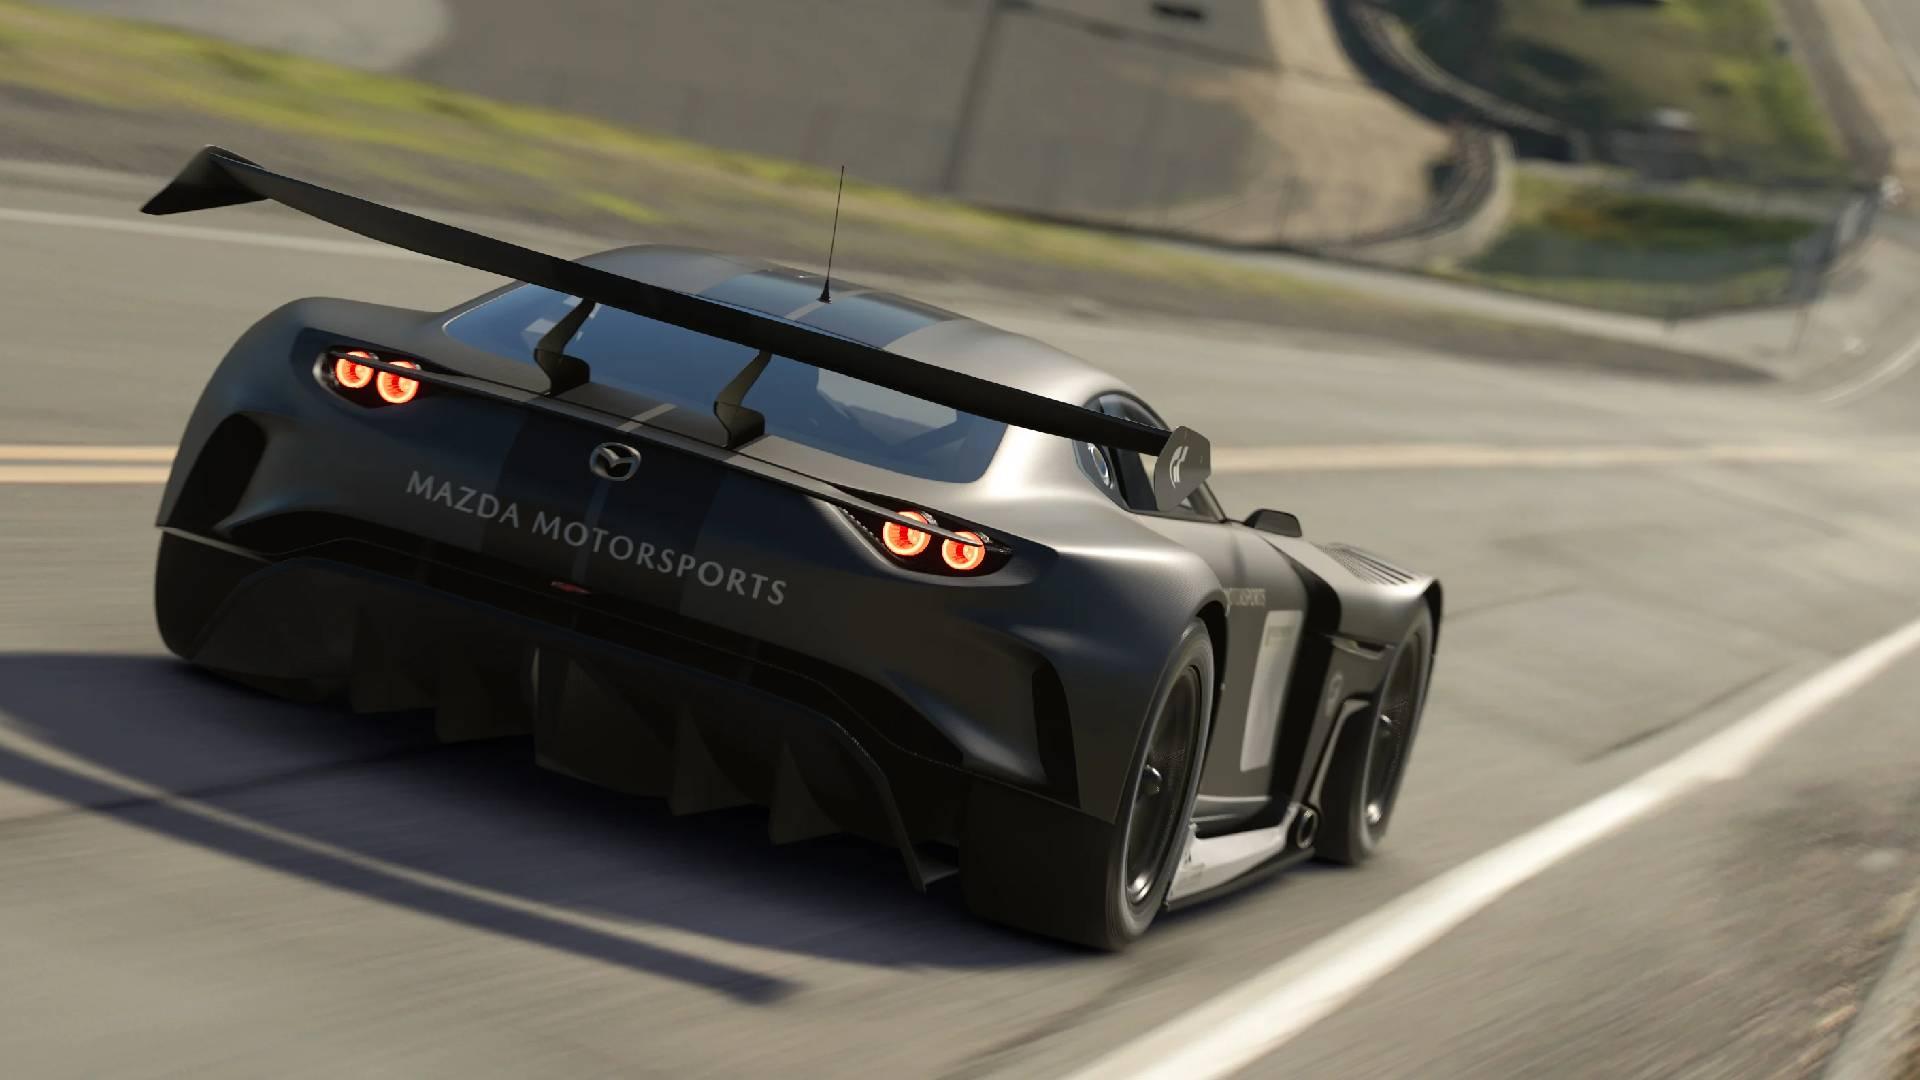 Gran Turismo 7 crossplay – can you play with your friends on PS4